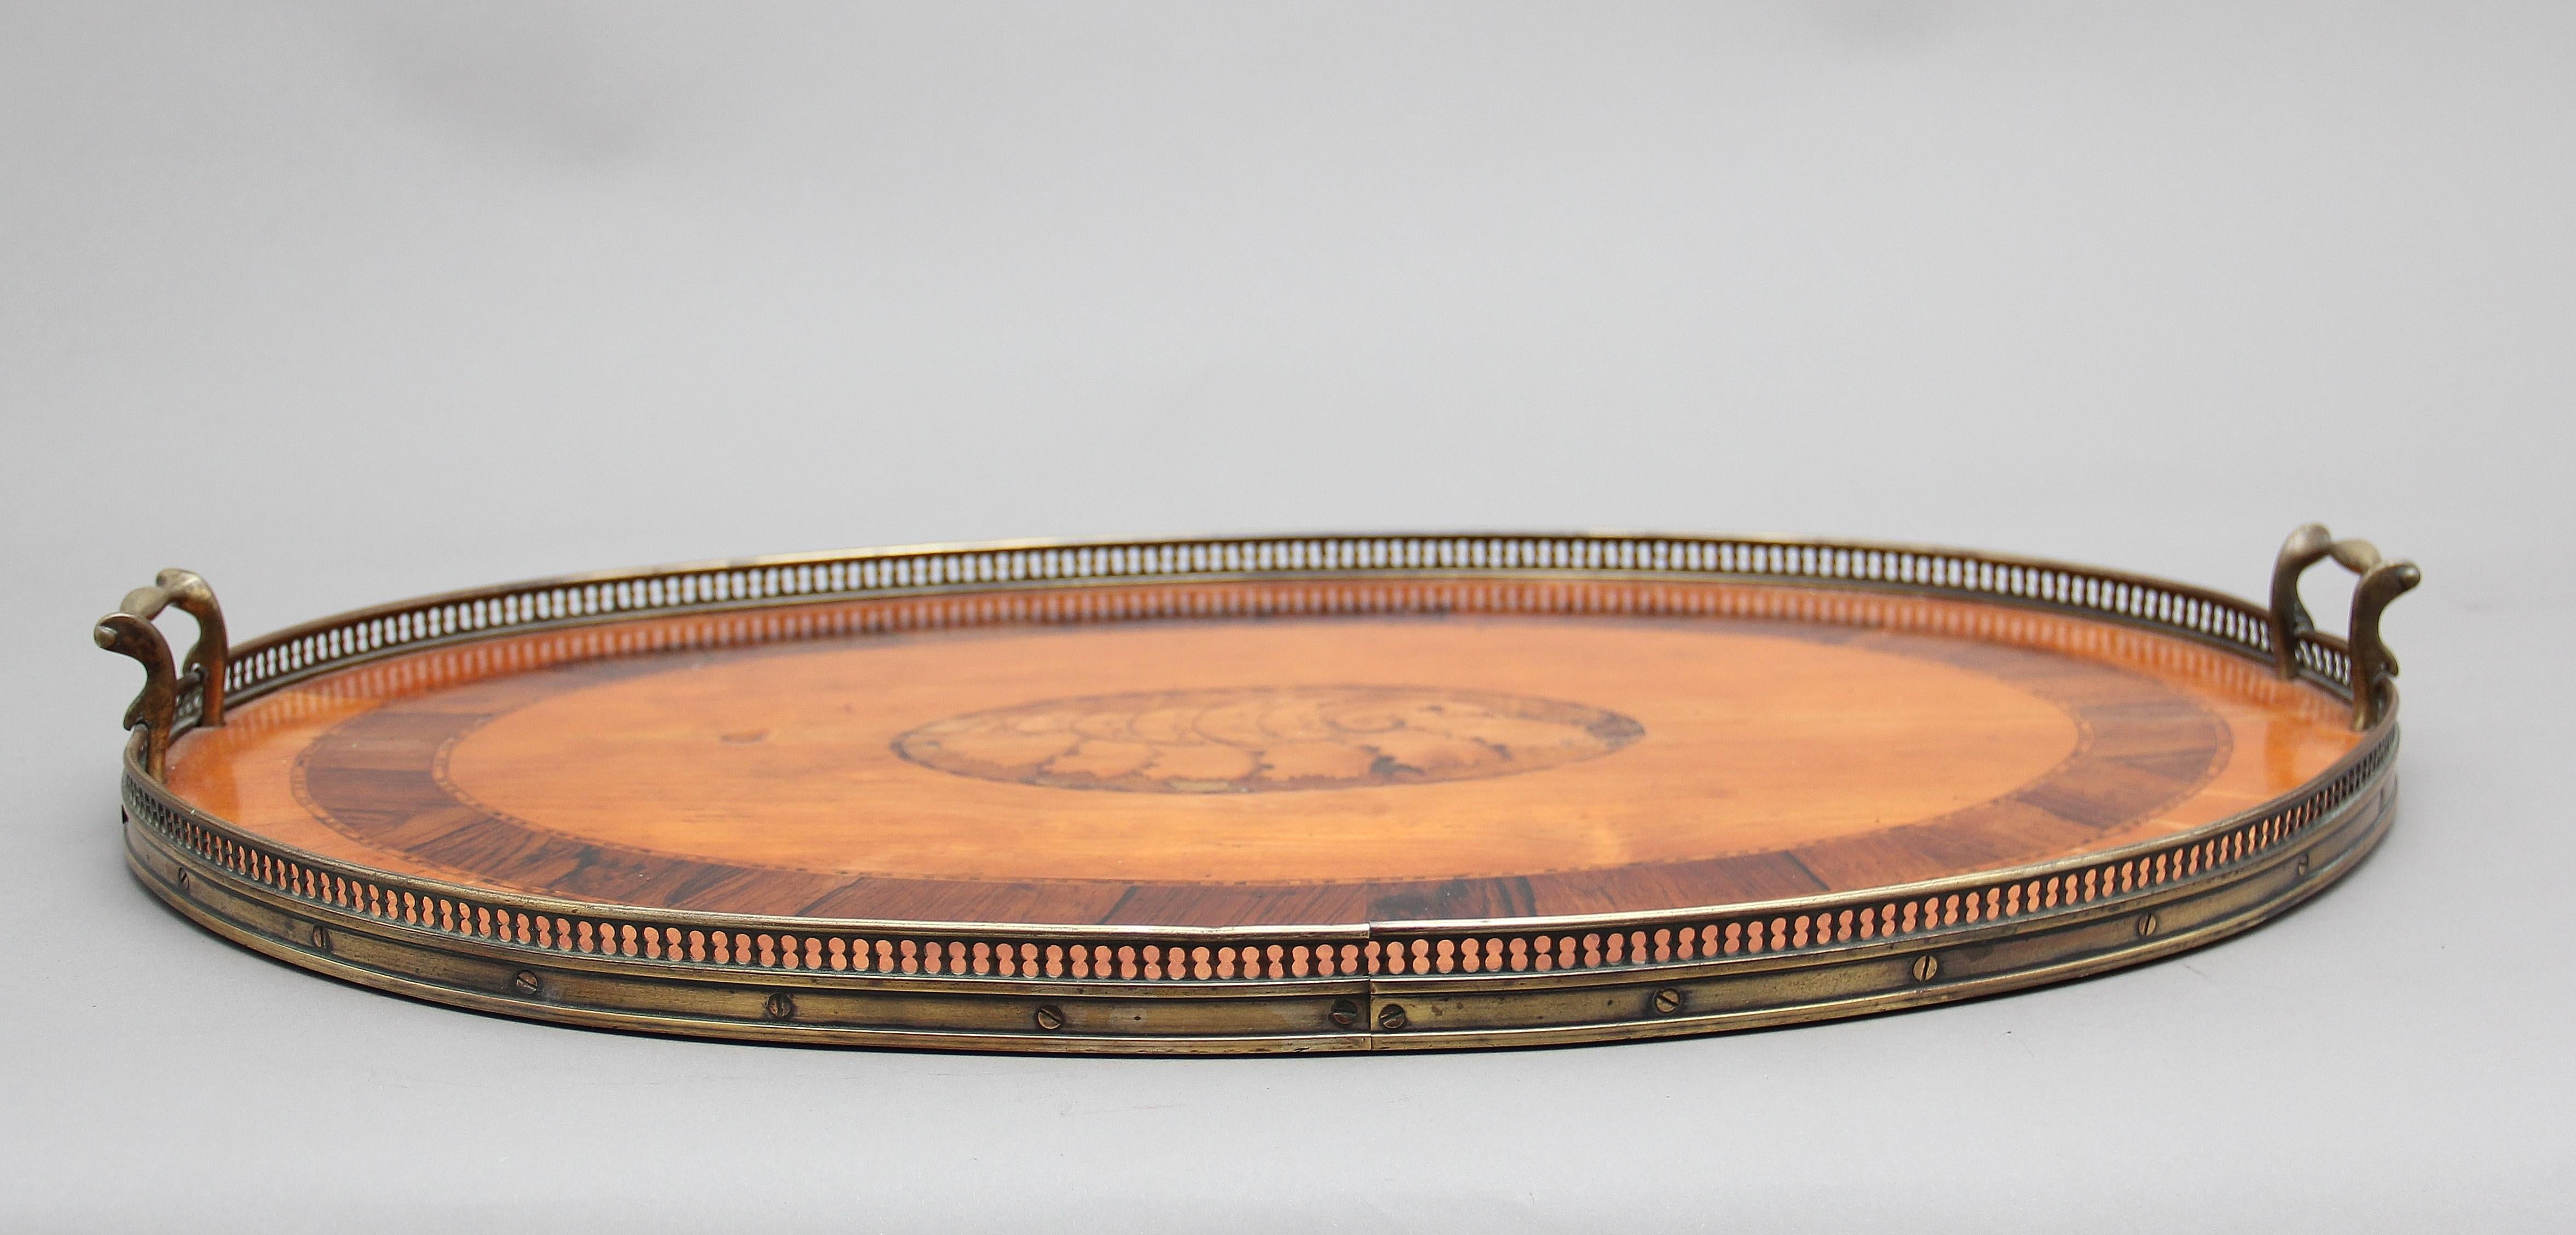 A decorative 19th century satinwood, brass and inlaid tray, the top crossbanded with inlaid shell decoration at the centre, having a pierced brass gallery running around the edge and brass carrying handles either end, circa 1880.
   